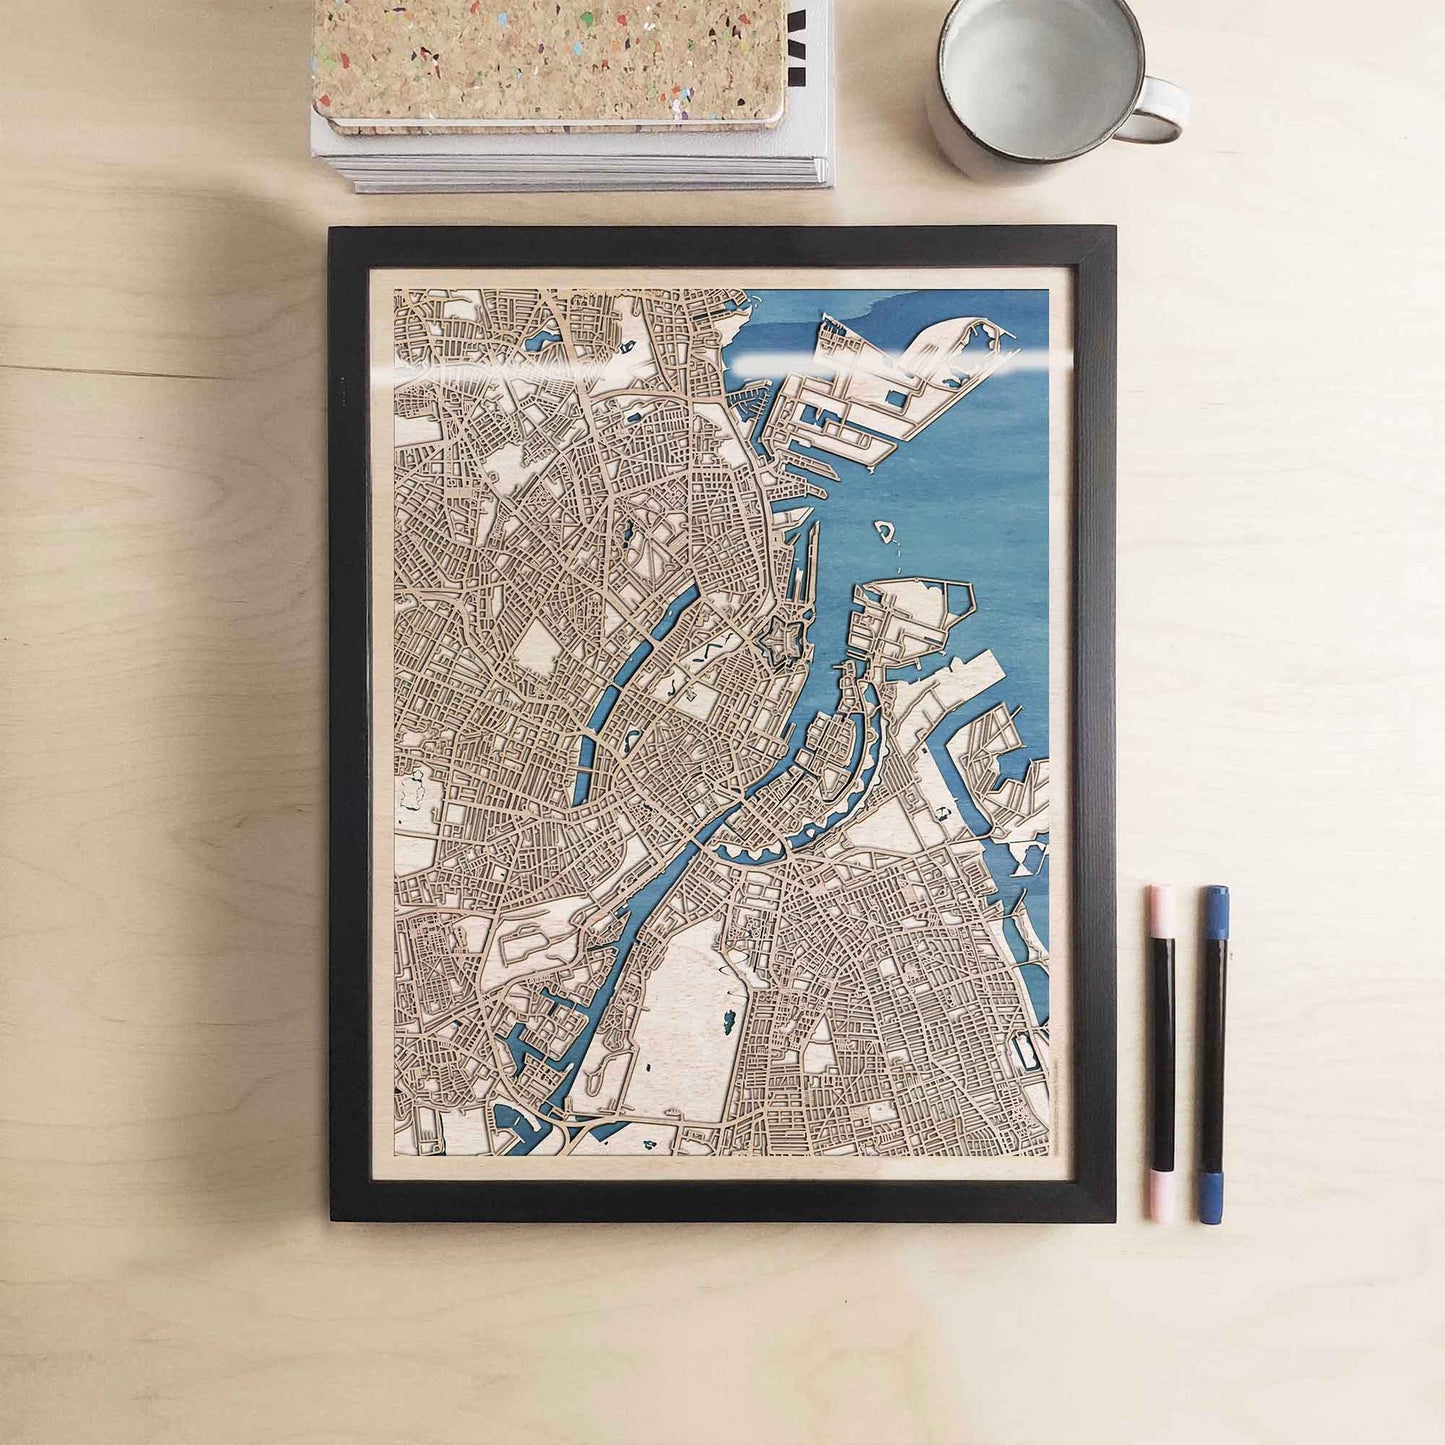 Copenhagen Wooden Map by CityWood - Custom Wood Map Art - Unique Laser Cut Engraved - Anniversary Gift